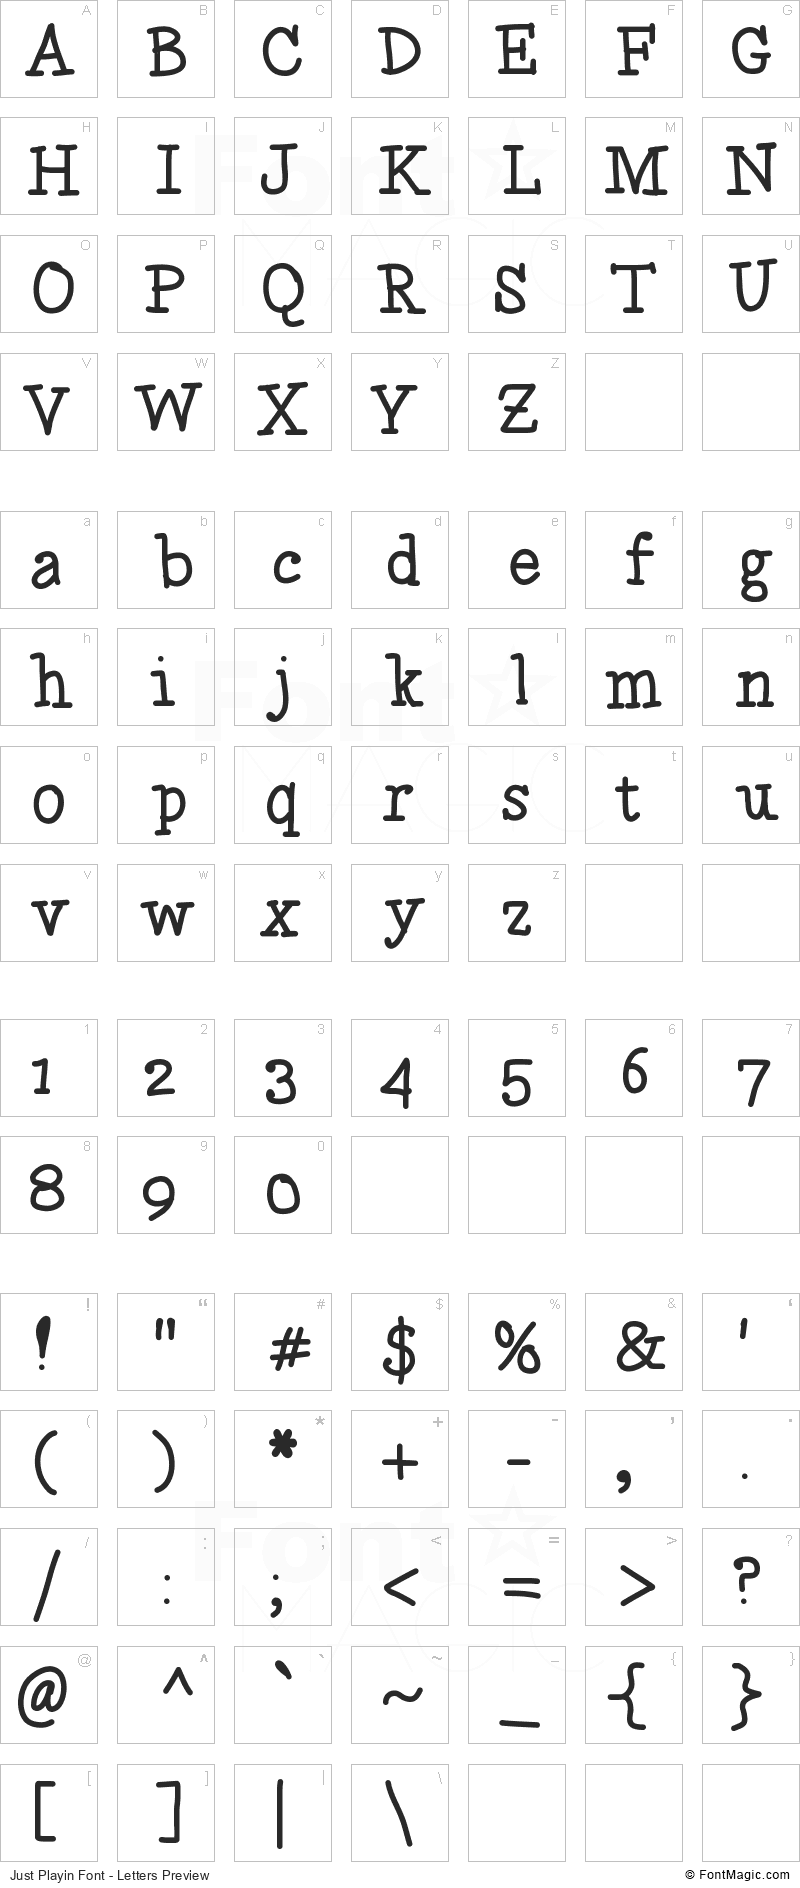 Just Playin Font - All Latters Preview Chart